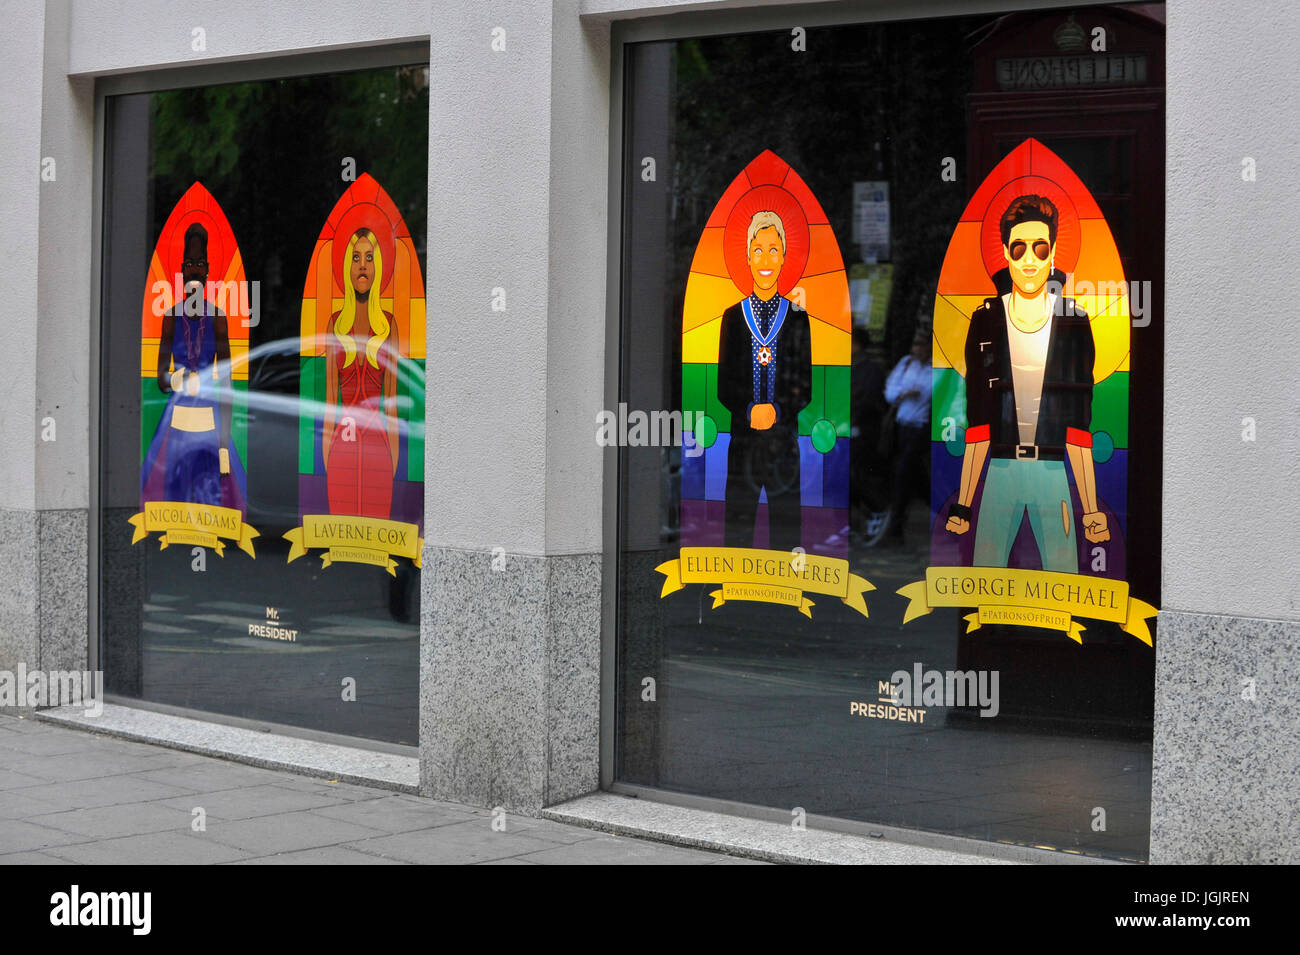 London, UK. 7th July, 2017. Images of (L to R) Boxer Nicola Adams, actress Laverne Cox, comedienne Ellen Degeneres and singer George Michael are unveiled by Mr President, a Soho advertising agency, as a tribute to modern icons of tolerance and acceptance, to support the LGBT community, ahead of the annual Pride parade tomorrow. Credit: Stephen Chung/Alamy Live News Stock Photo